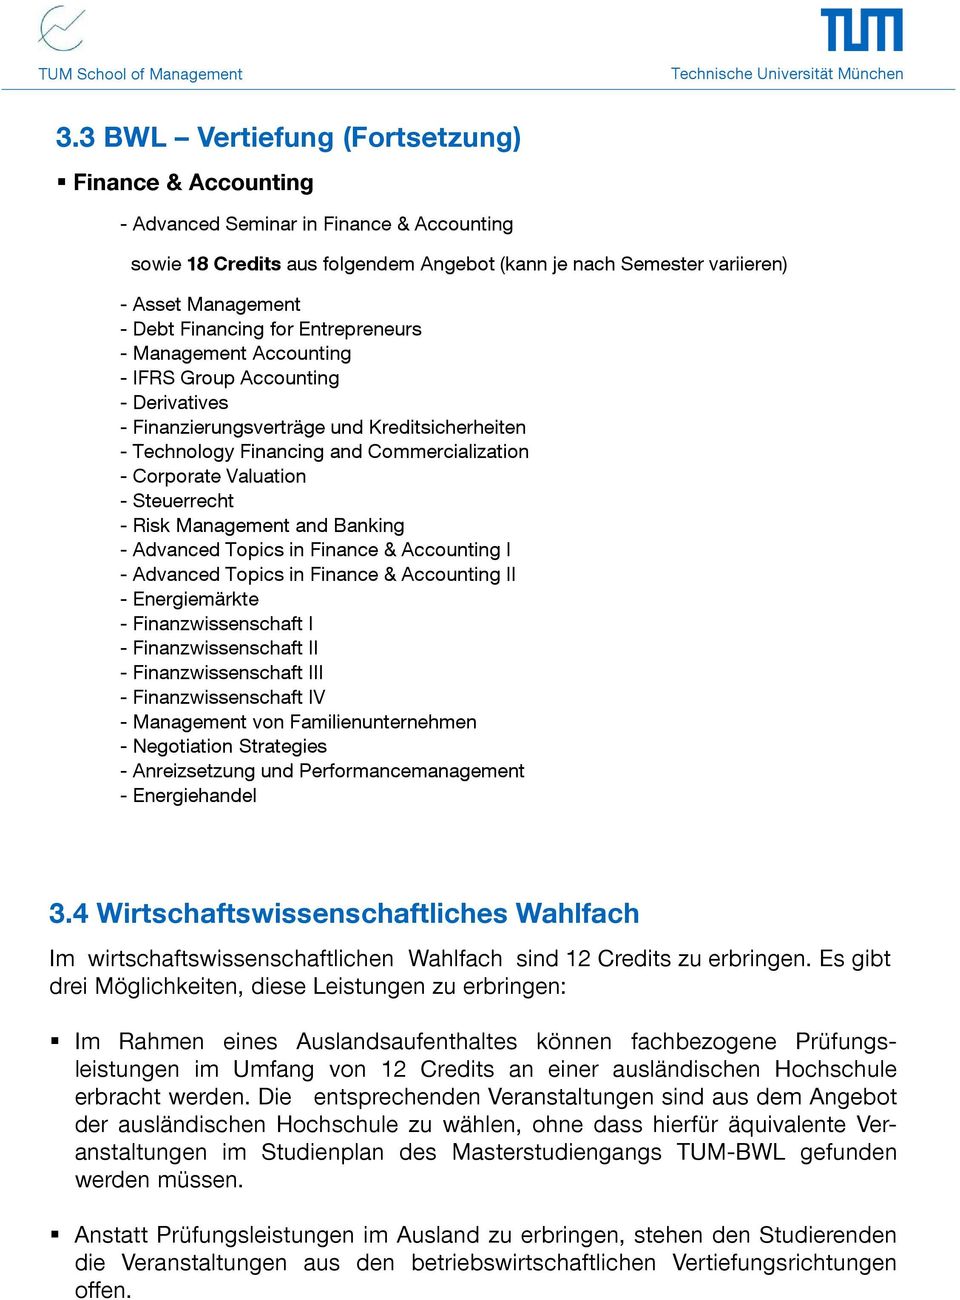 Valuation - Steuerrecht - Risk Management and Banking - Advanced Topics in Finance & Accounting I - Advanced Topics in Finance & Accounting II - Energiemärkte - Finanzwissenschaft I -